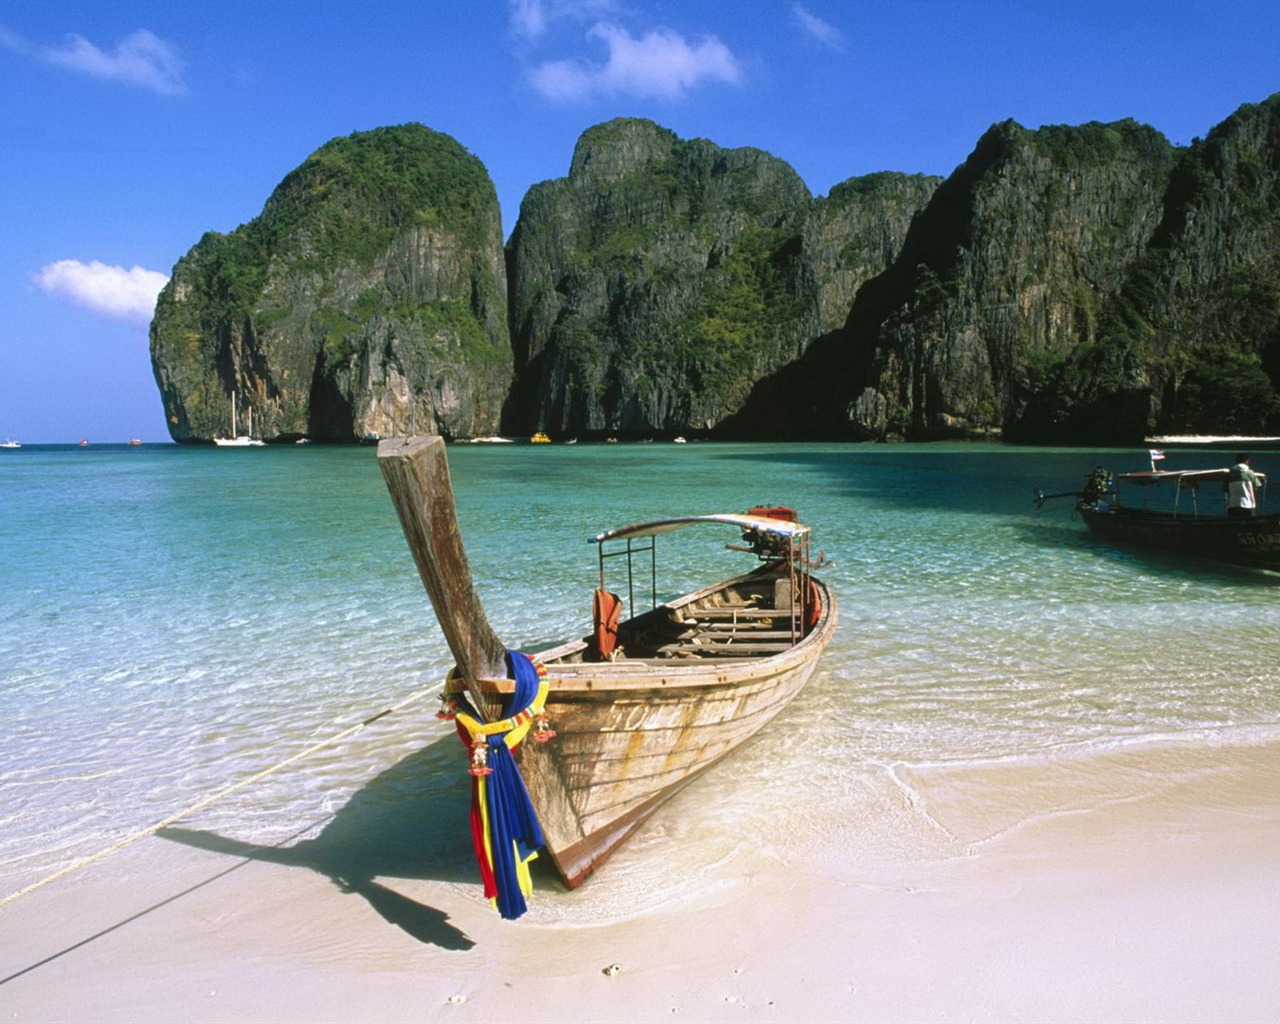 Thailand's natural beauty wallpapers #1 - 1280x1024